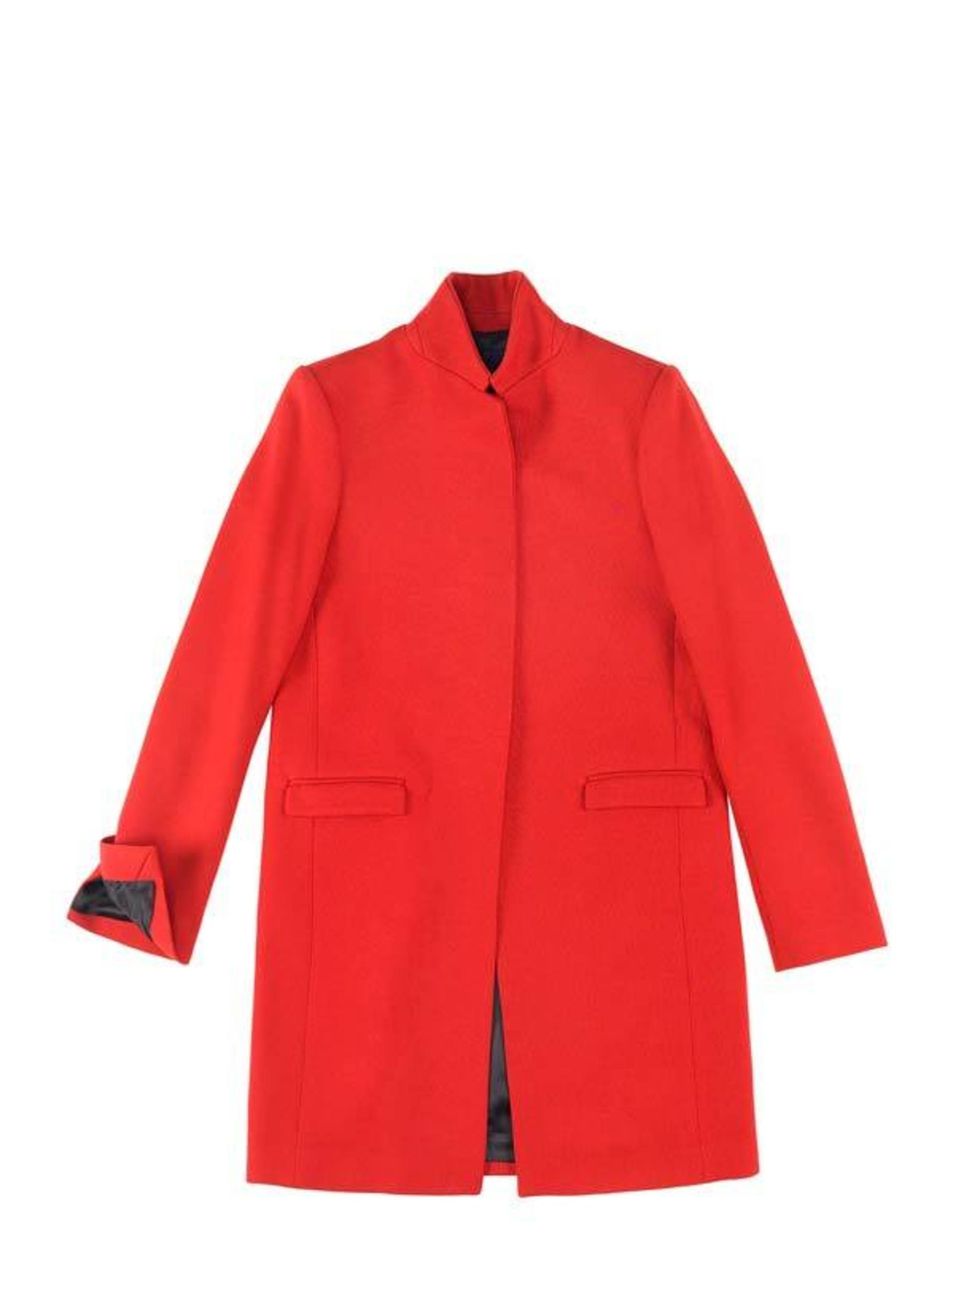 <p> </p><p> </p><p>This stand-out pillar box red coat will brighten up the cold days and will remain a style classic for seasons to come... <a href="http://www.zara.com/webapp/wcs/stores/servlet/product/uk/en/zara-sales/11002/199374/VELVETEEN%2BCOAT">Zara